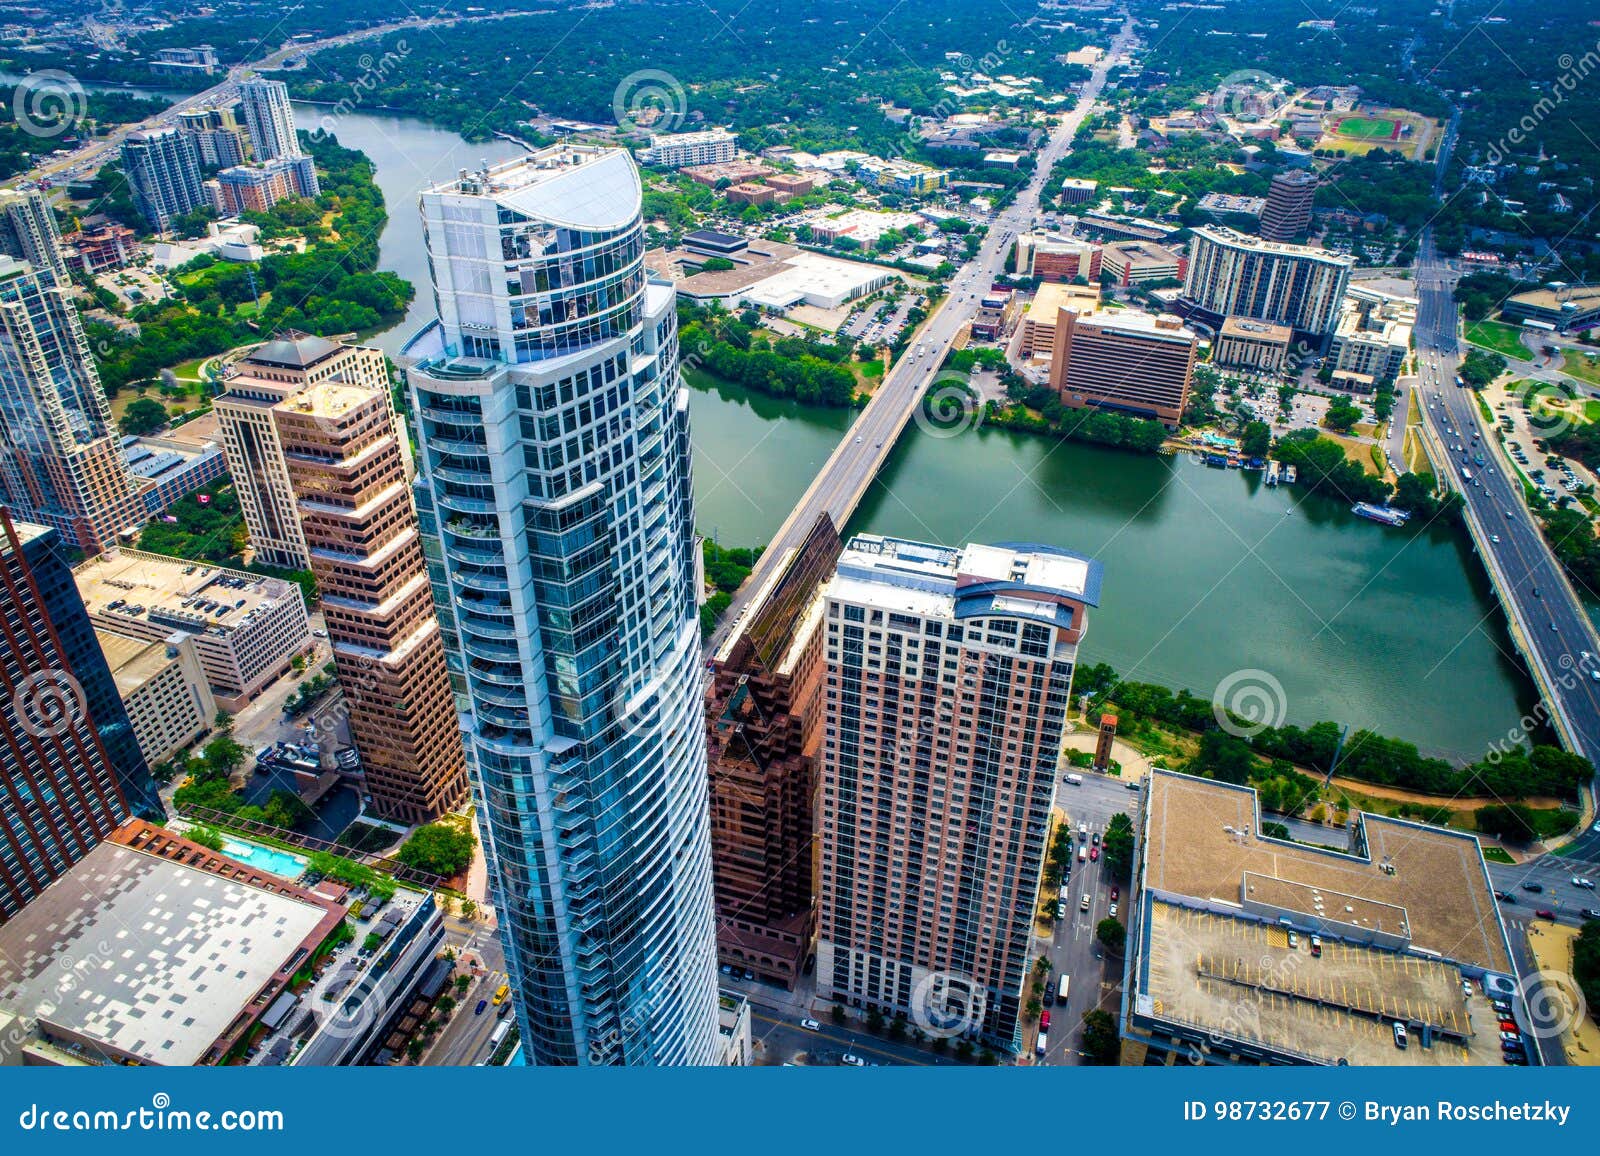 High Above Austin Texas Tallest Tower Looking Down Congress Avenue High Aerial  Drone View Stock Image - Image of aerial, tower: 98732677